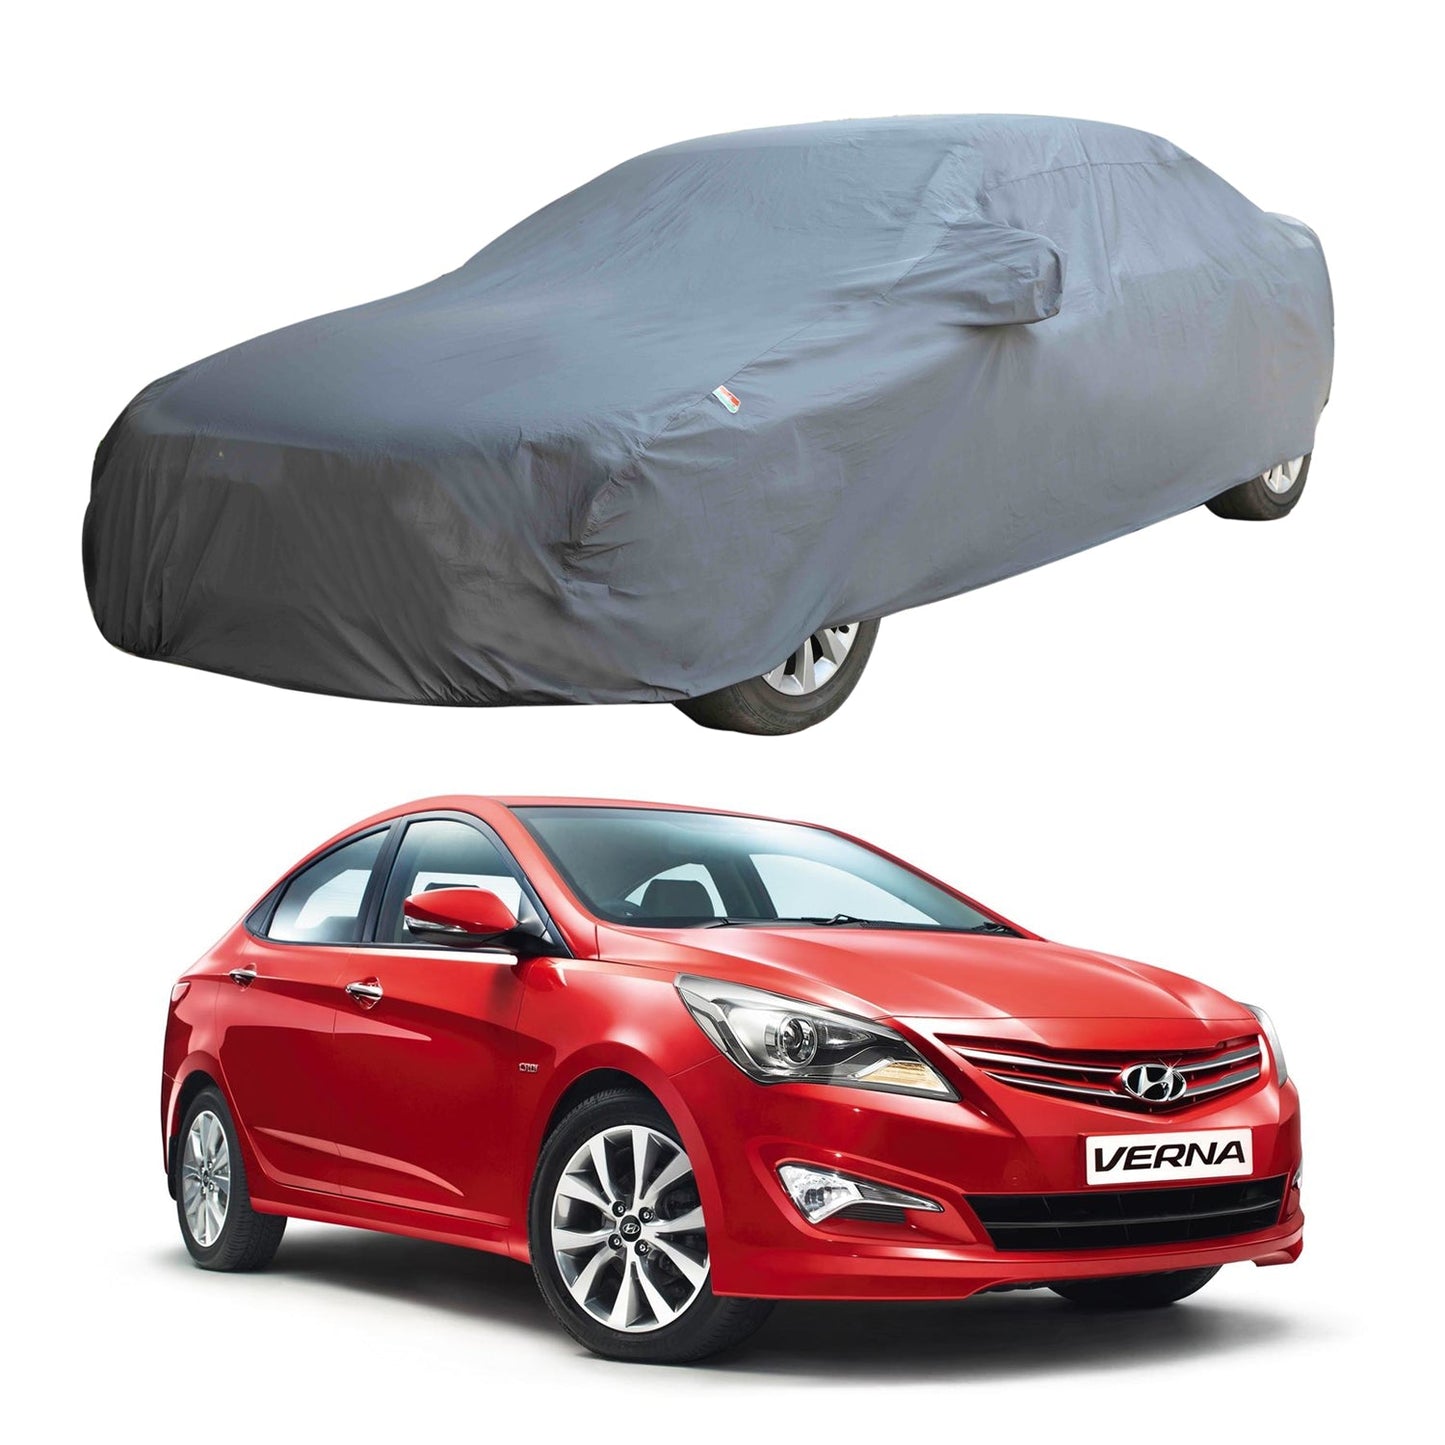 Oshotto Dark Grey 100% Anti Reflective, dustproof and Water Proof Car Body Cover with Mirror Pockets For Hyundai Verna Fluidic